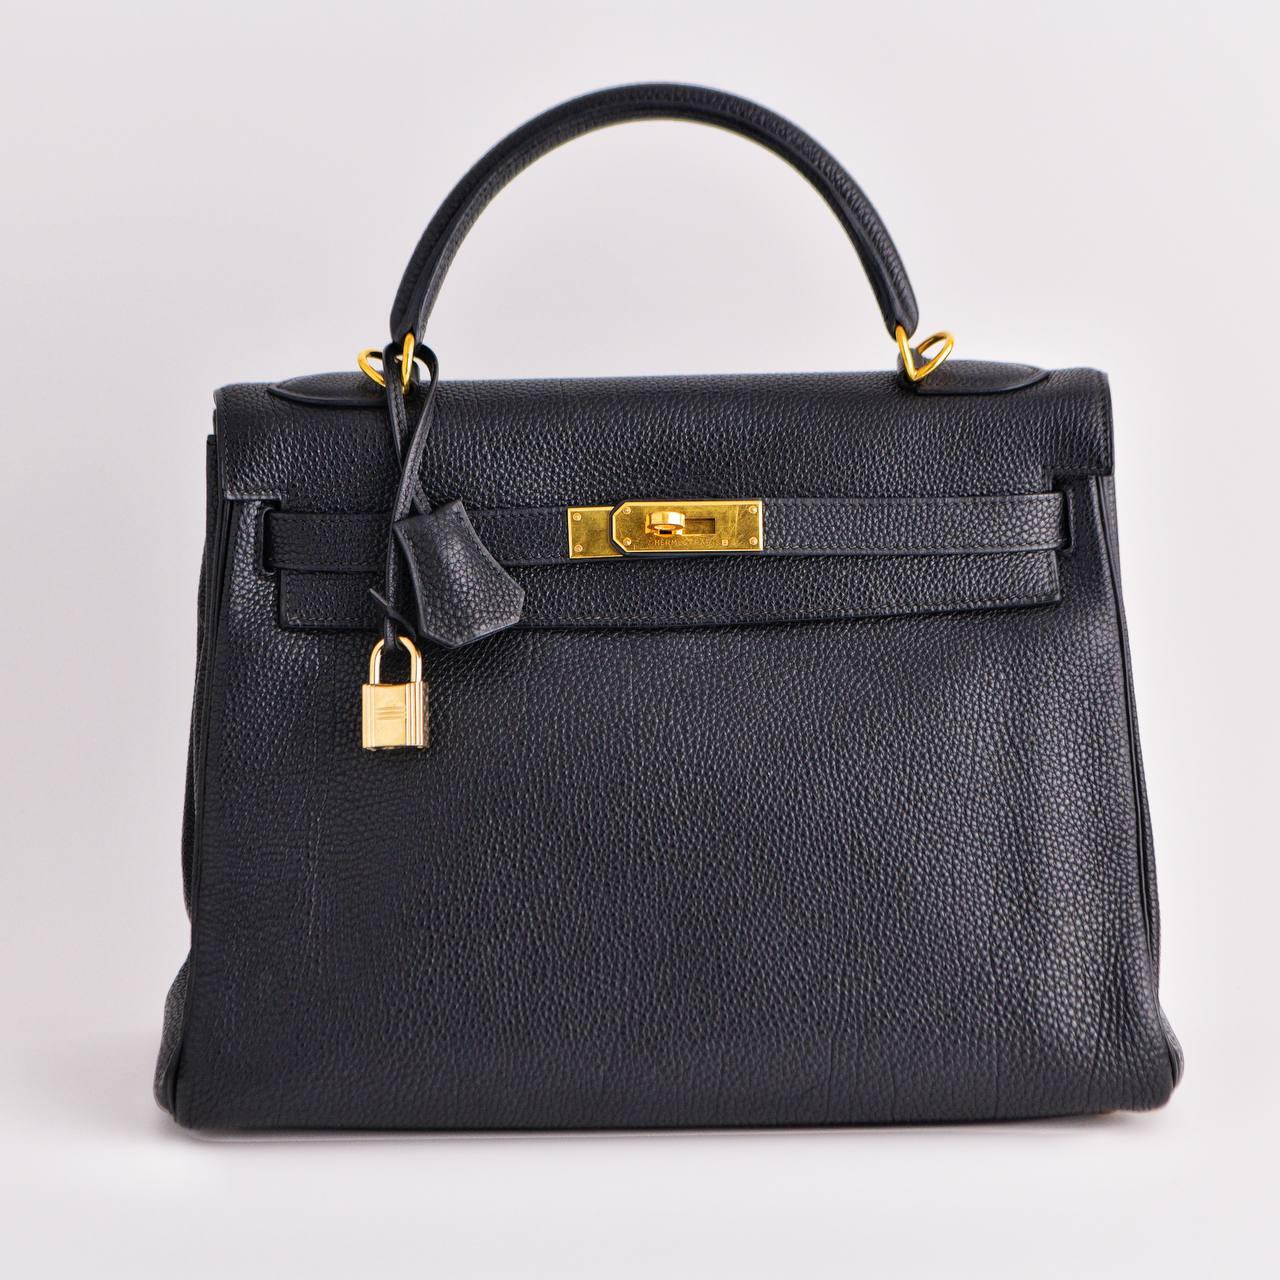 SKU AT-1880
Brand Hermès
Model Kelly 32
Date Stamp E in Square
Date Circa 2001
Color and Colour Code Black, 89
_________________________________________________
Metal Gold
Material Togo
Strap Length Approx 42cm, Handle 8cm
Measurements Approx. Width